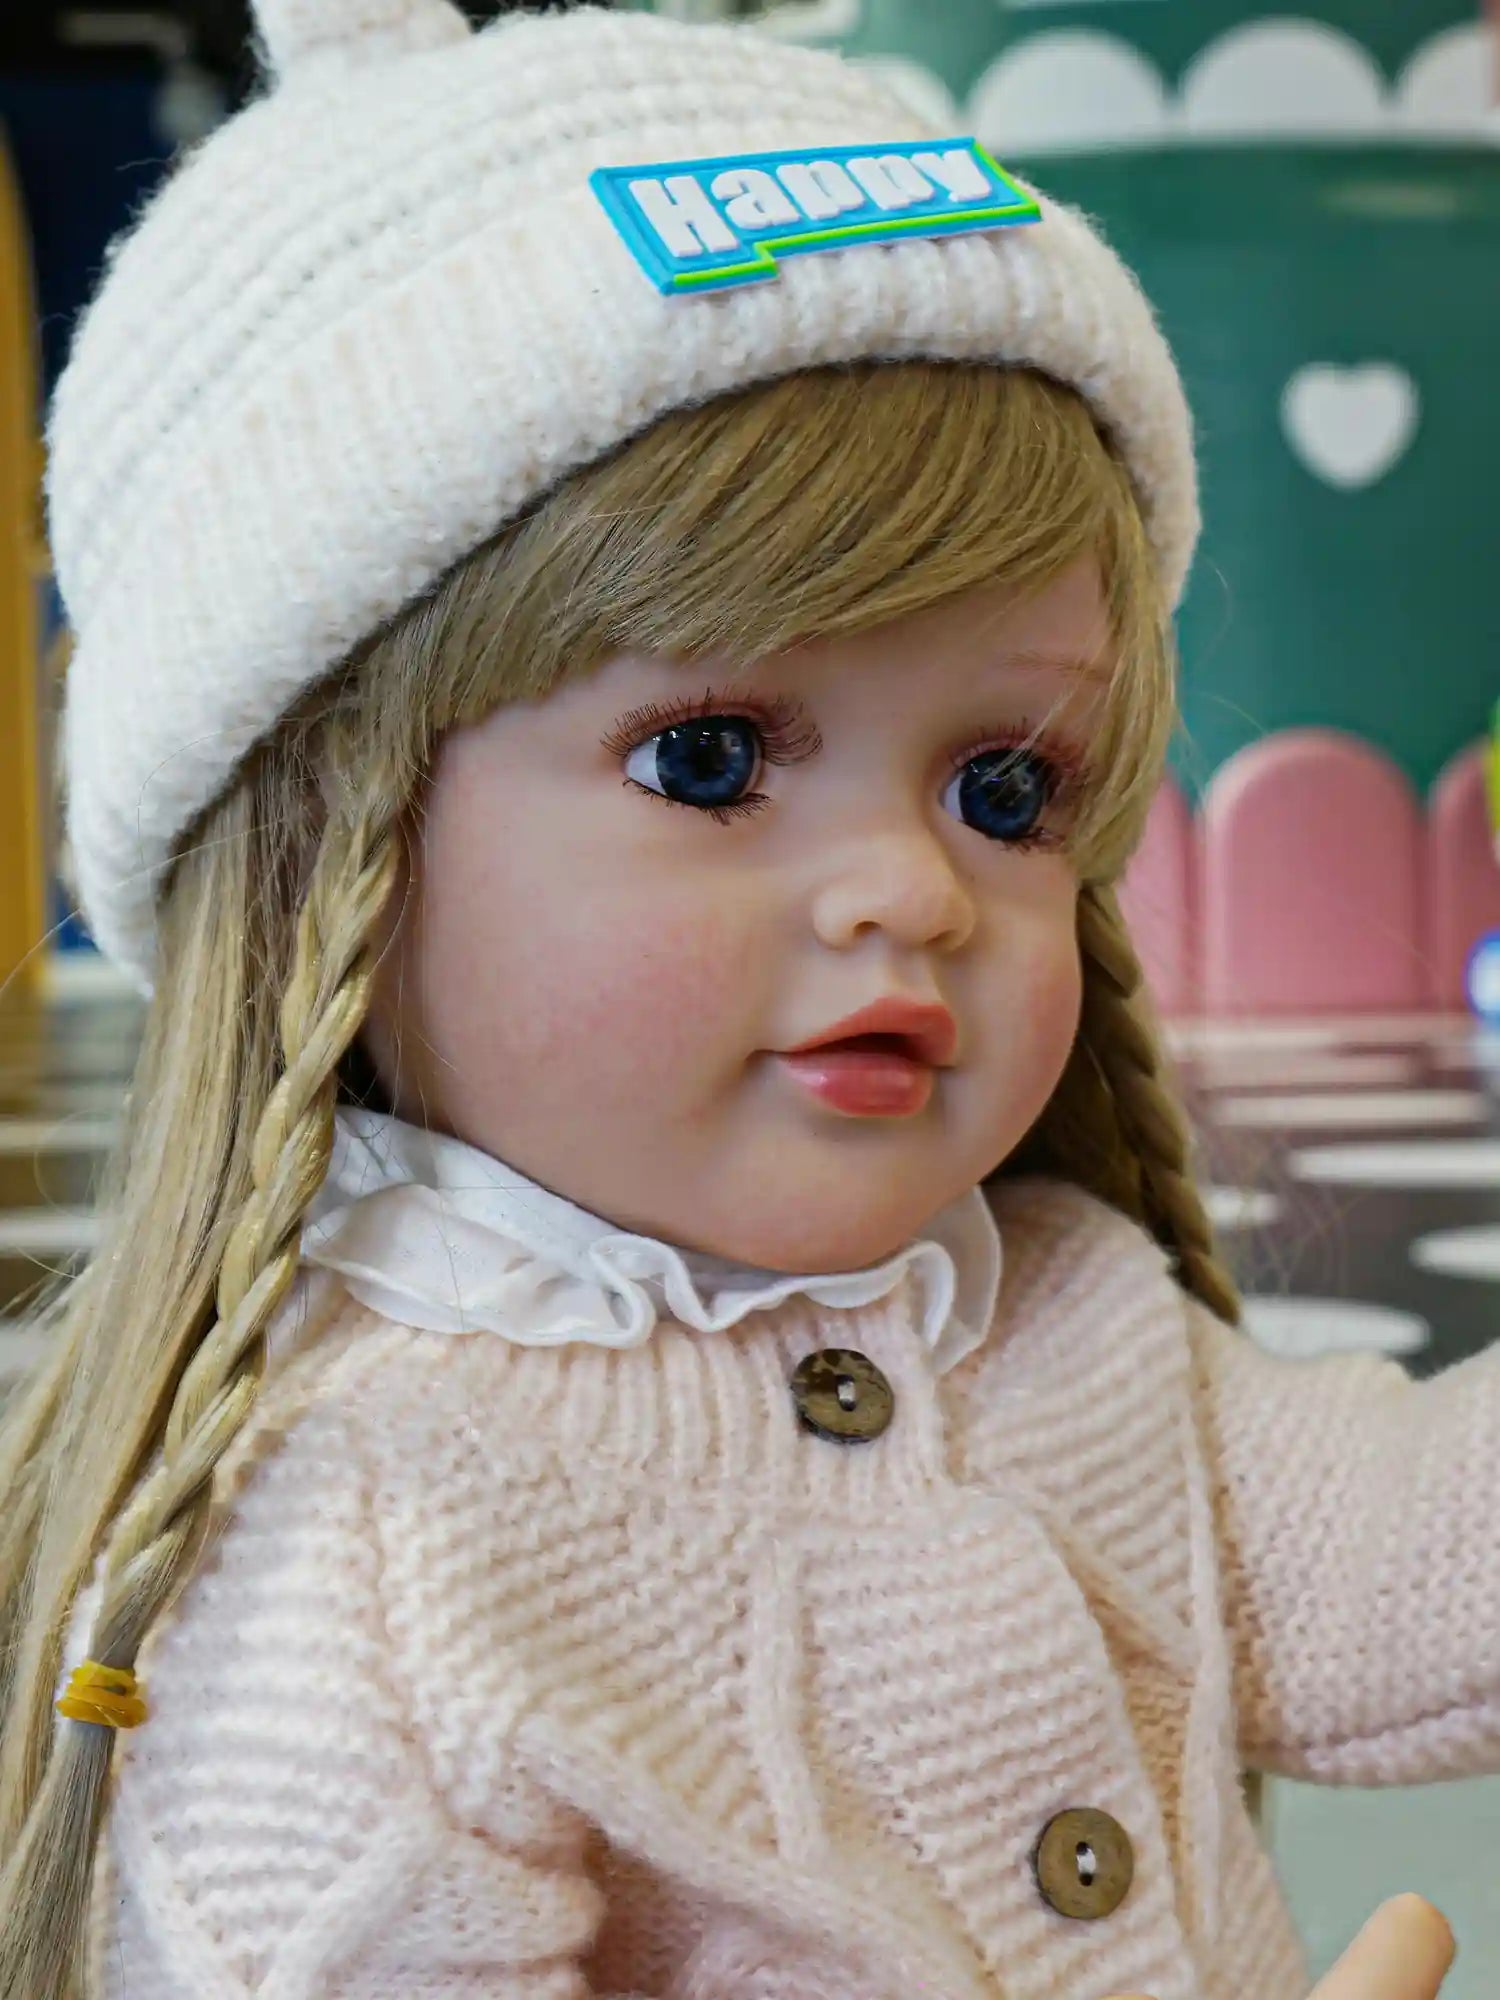 Chimidoll-cute toddler doll with long yellow hair, blue eyes, and a beige outfit